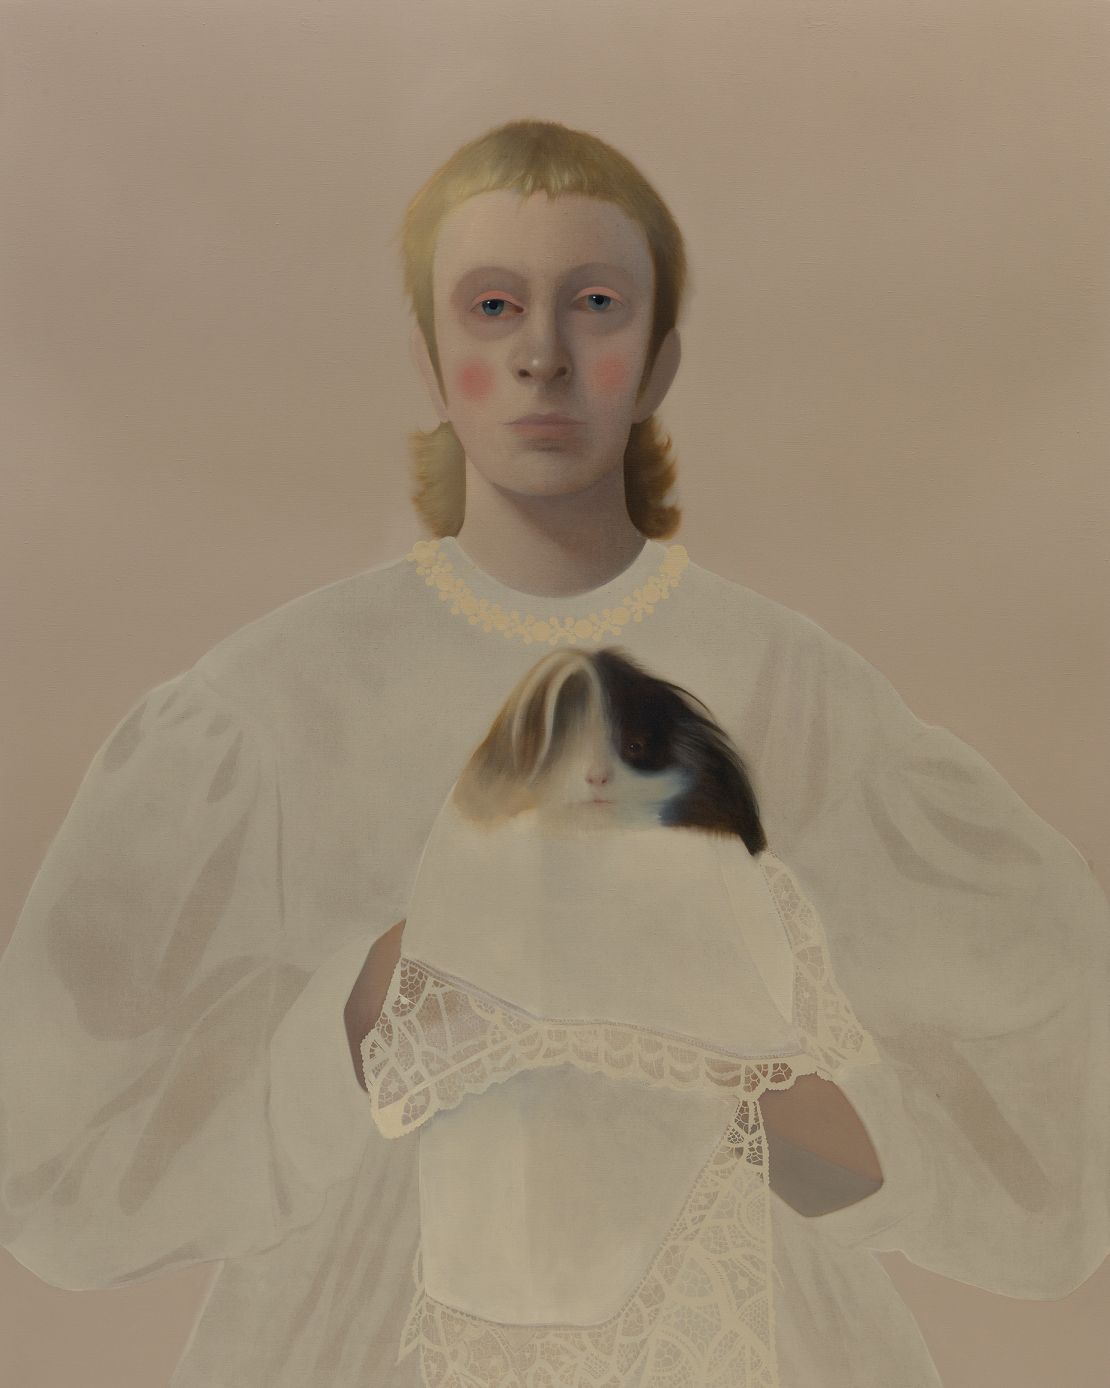 Ball's 2023 painting "Declan (In Simone Rocha With Eddie)." Ball imbues the pair with a self-composure that borders on stoicism; together, they project an imperiousness akin to a Holbein patron.